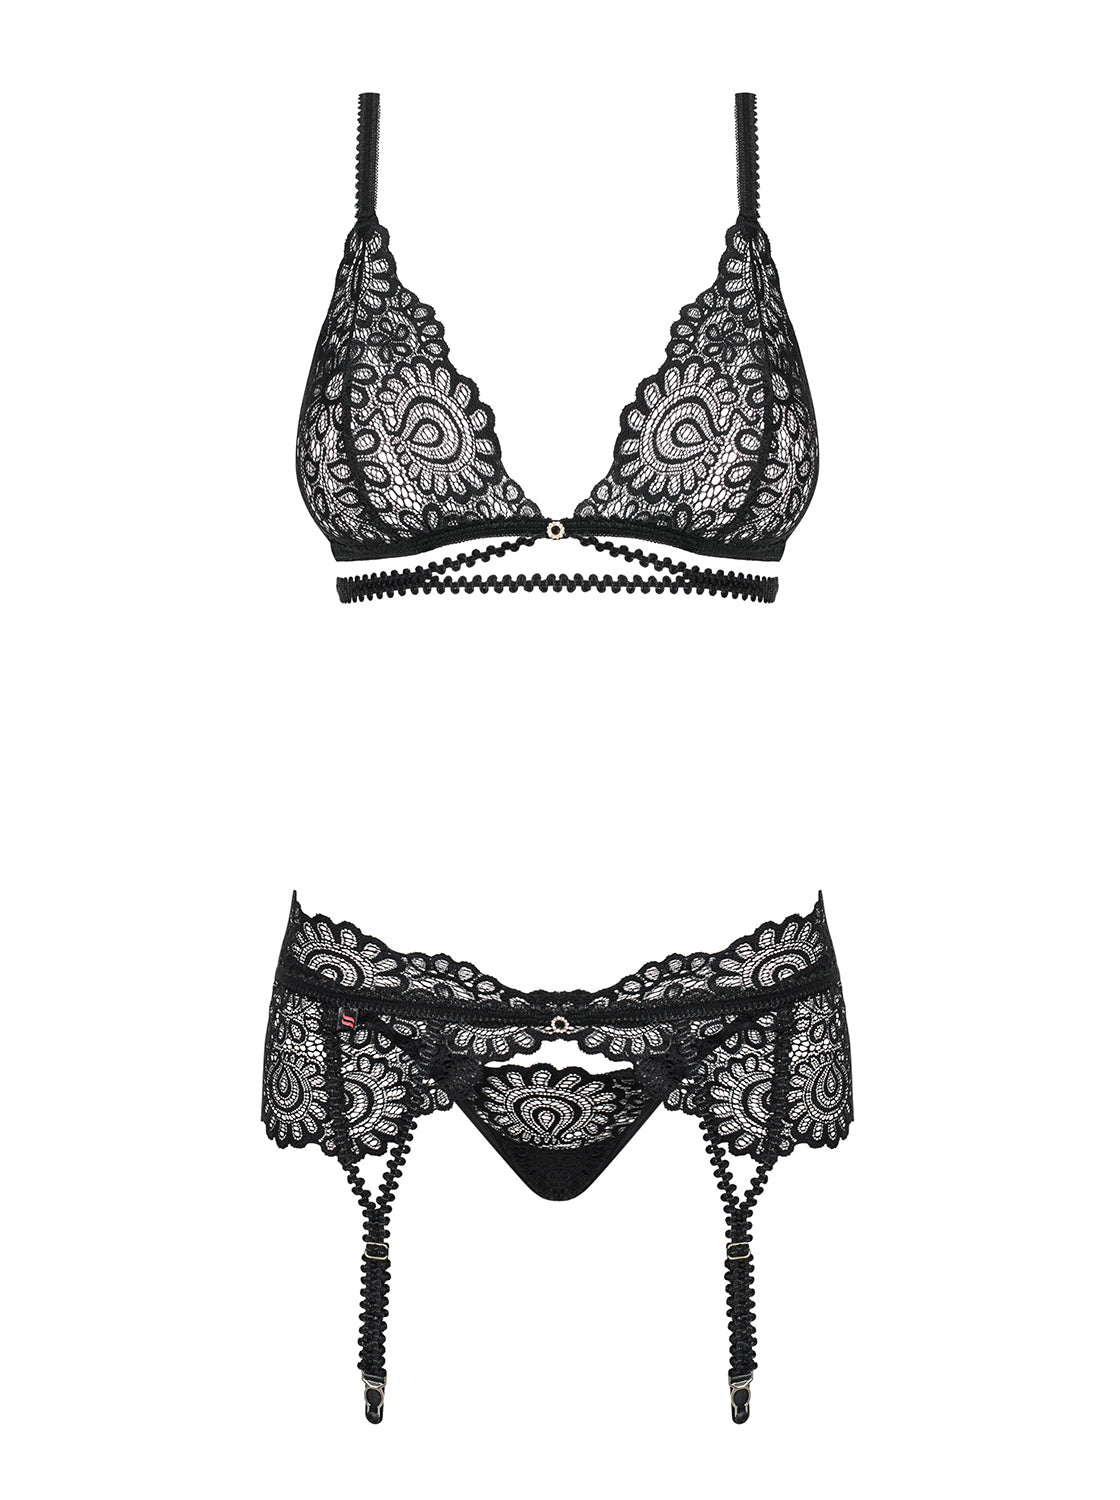 Mixty three-piece lingerie set consisting of a lace bra, garter belt and a matching thong